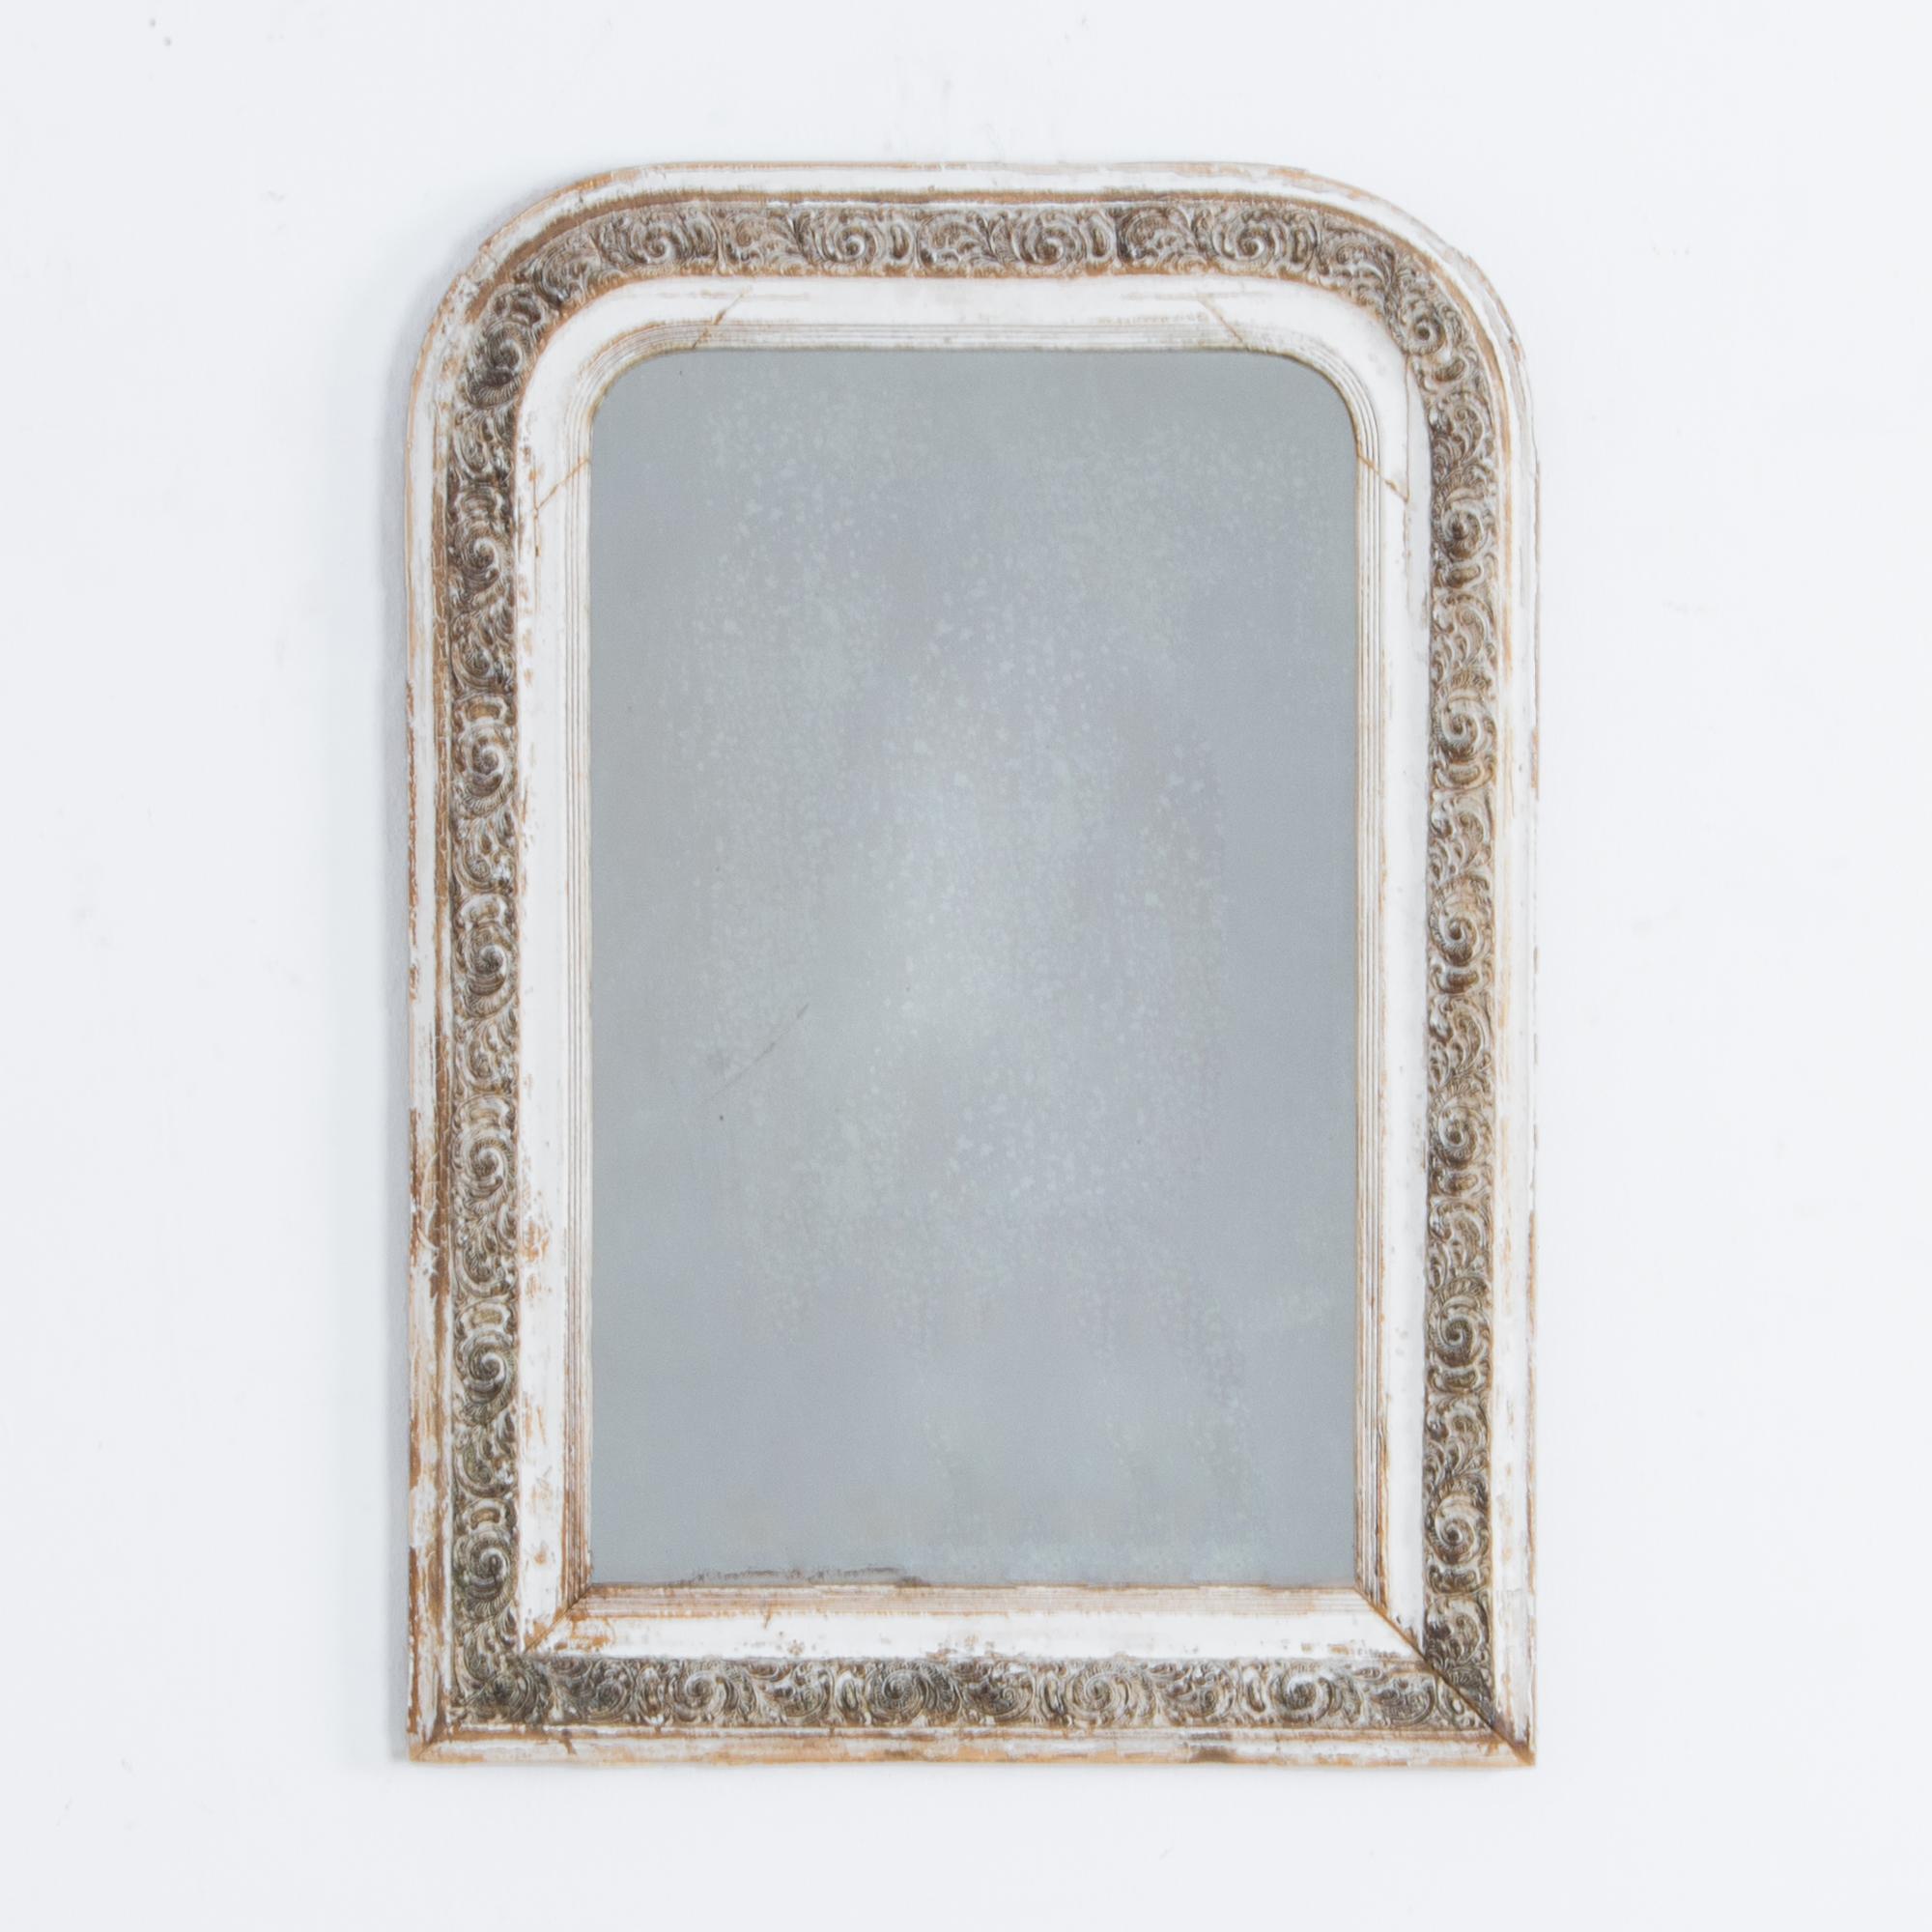 Contrasting the usual opulence of the Second Empire style, this simple white frame, subtly ornamented with a leaf patterned frieze, charms in spaces simple or ornate. From France, circa 1880. Finely crafted with traditional techniques from European